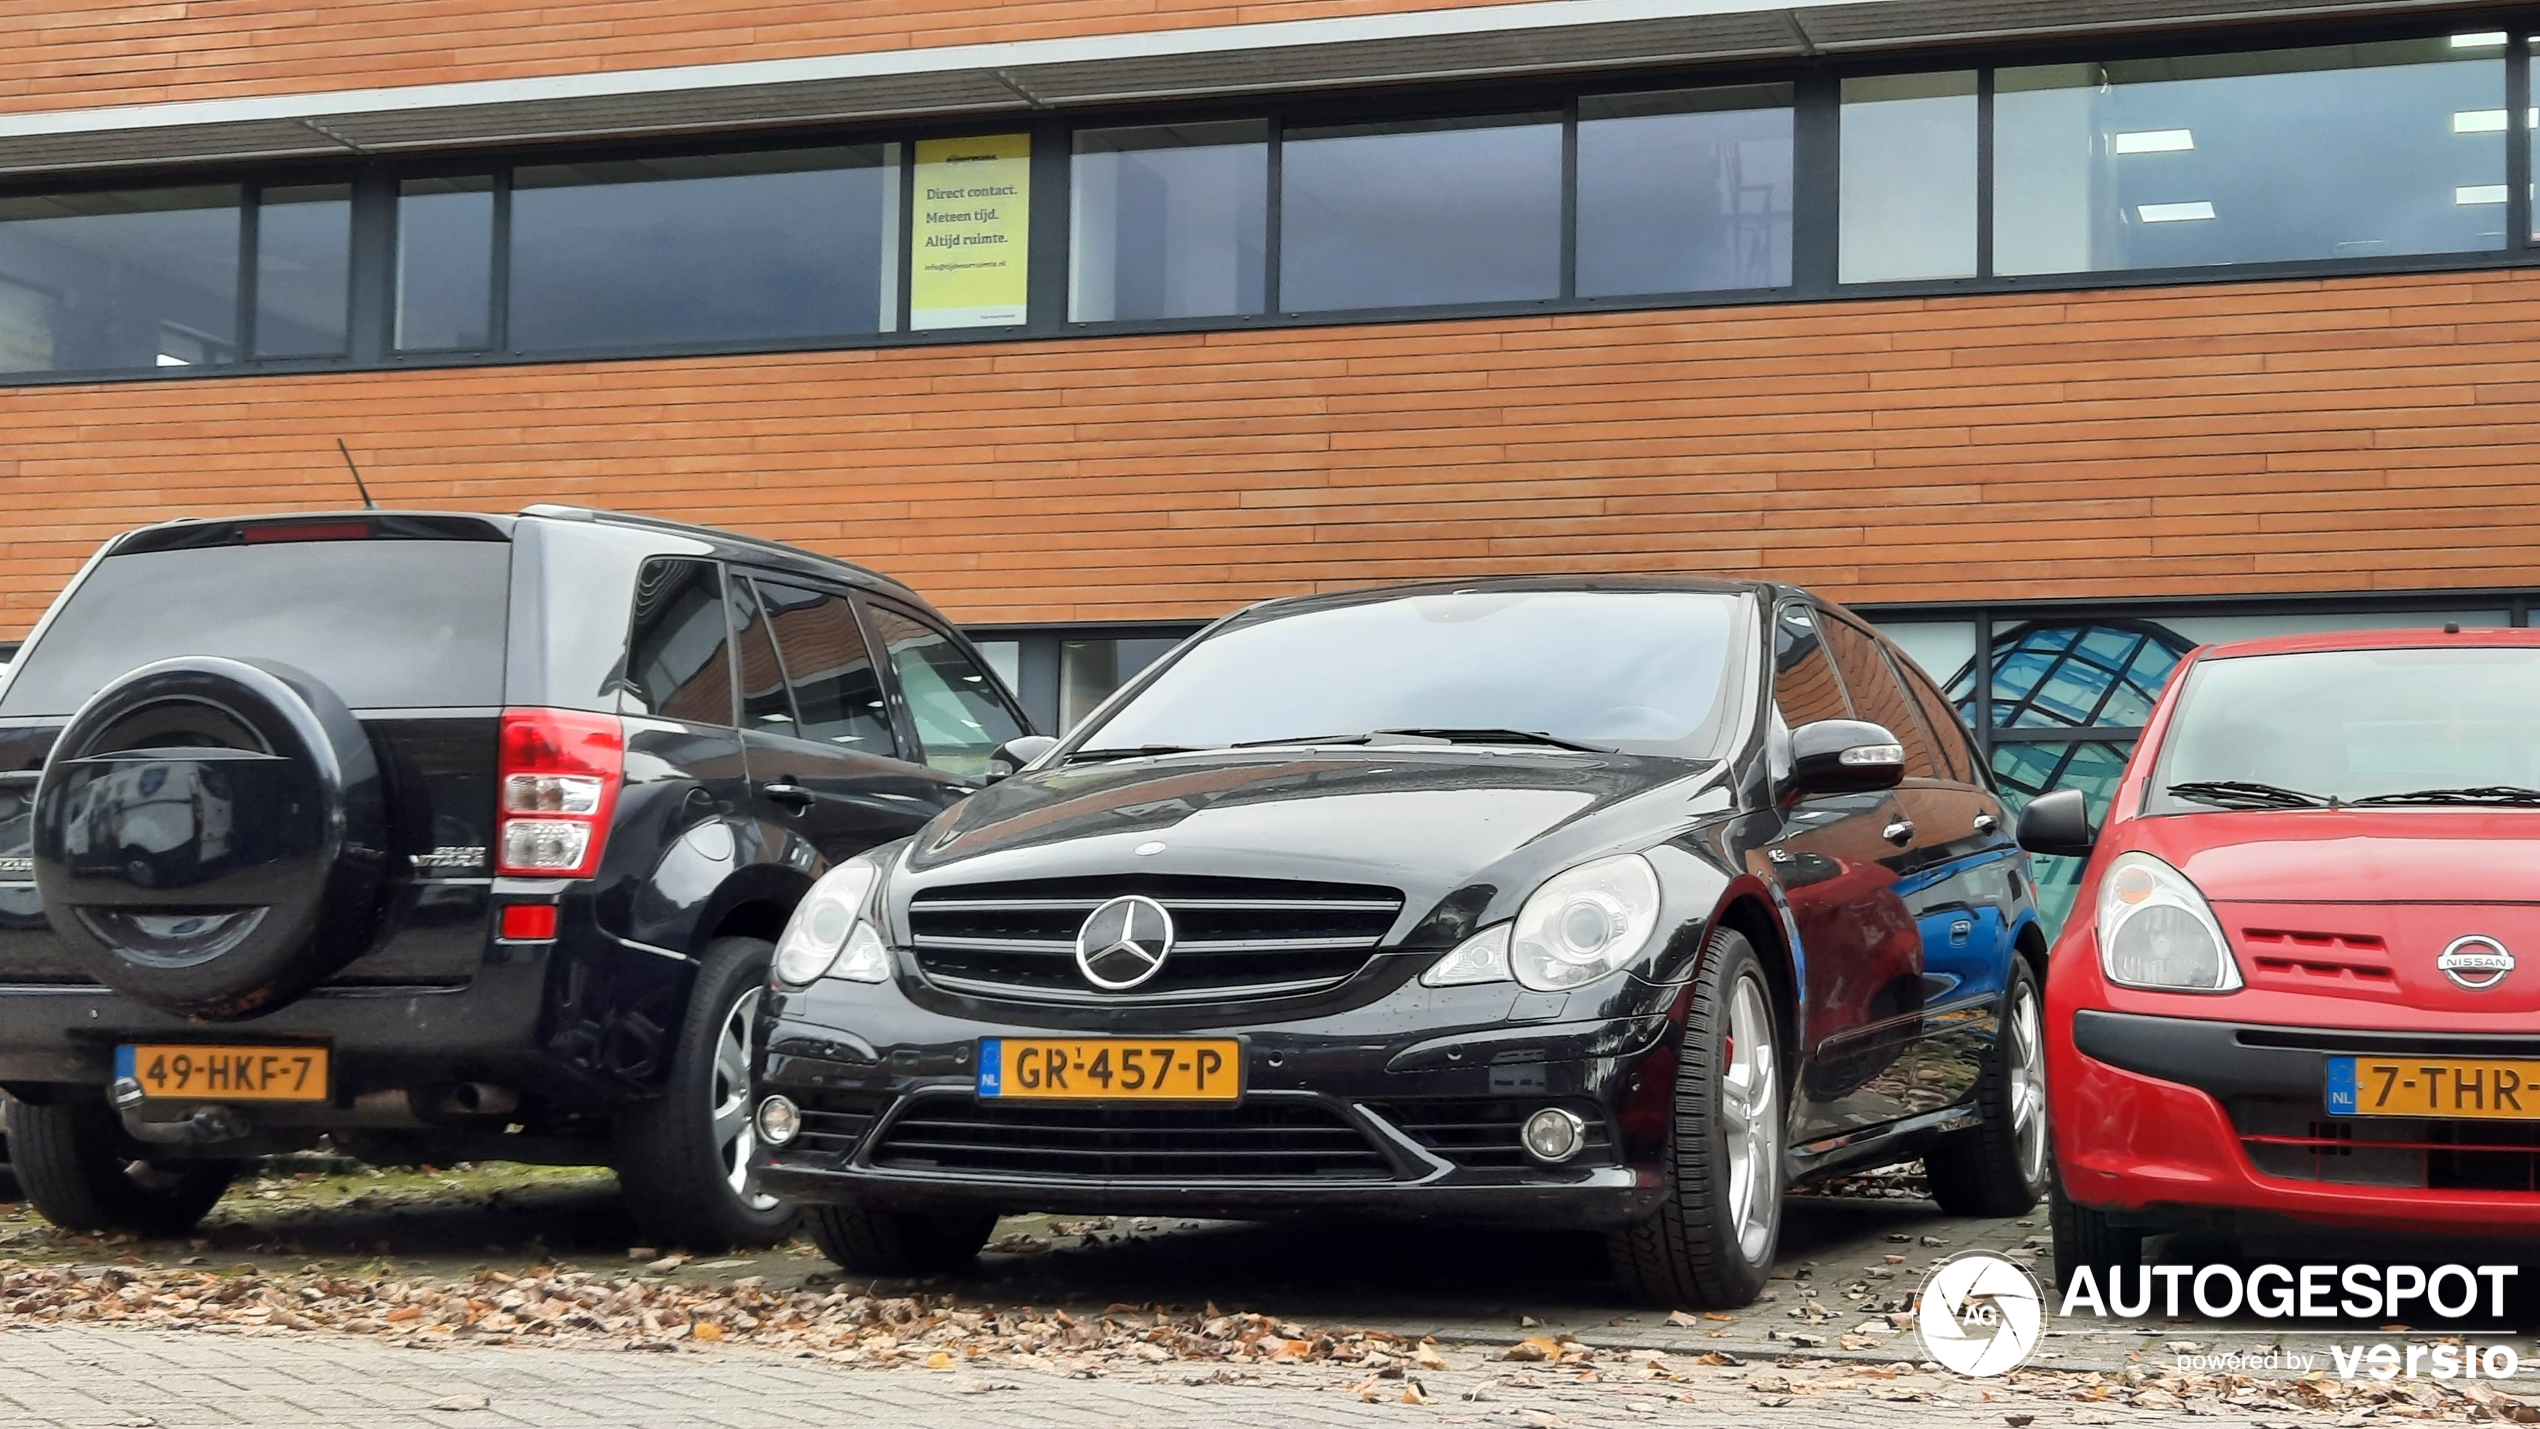 The rare R 63 AMG is seen in Tilburg